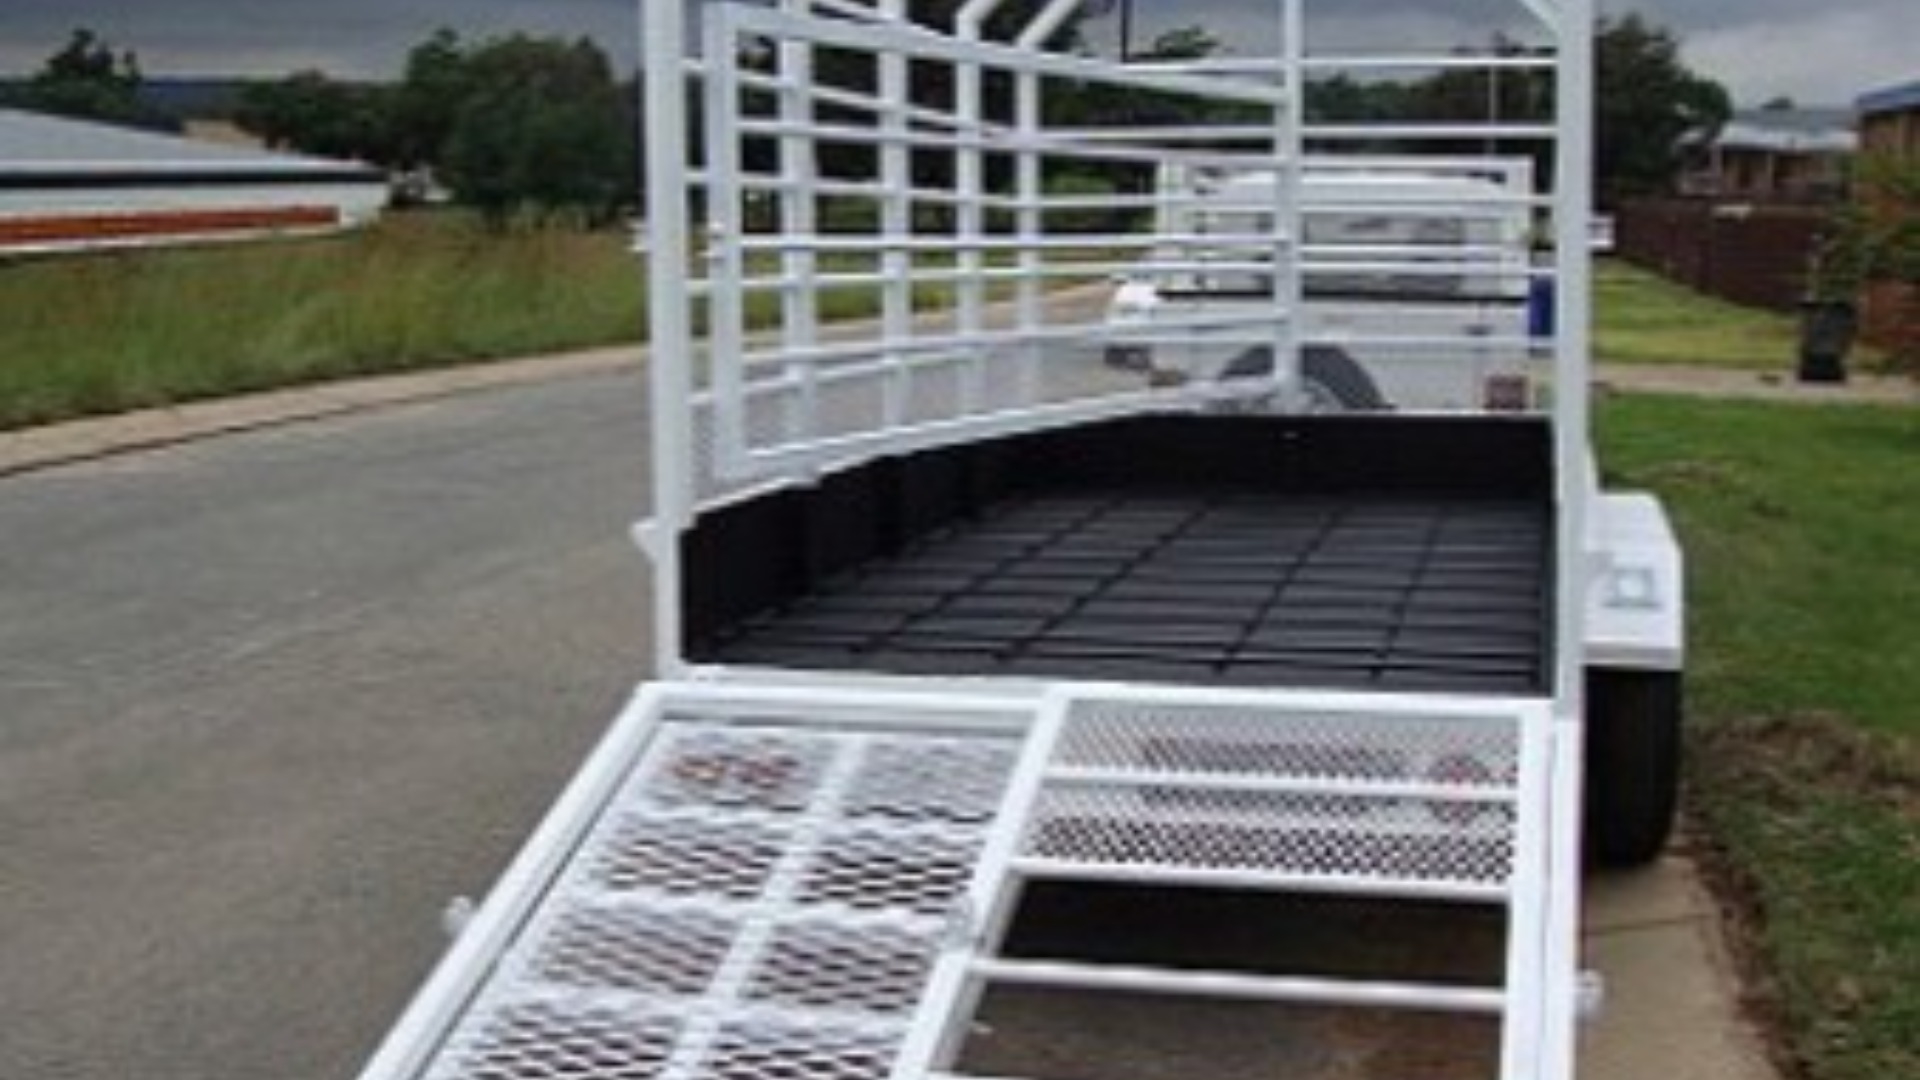 Custom Cattle trailer Livestock Trailers Available In Various Sizes KZN 2022 for sale by Jikelele Tankers and Trailers   | Truck & Trailer Marketplaces